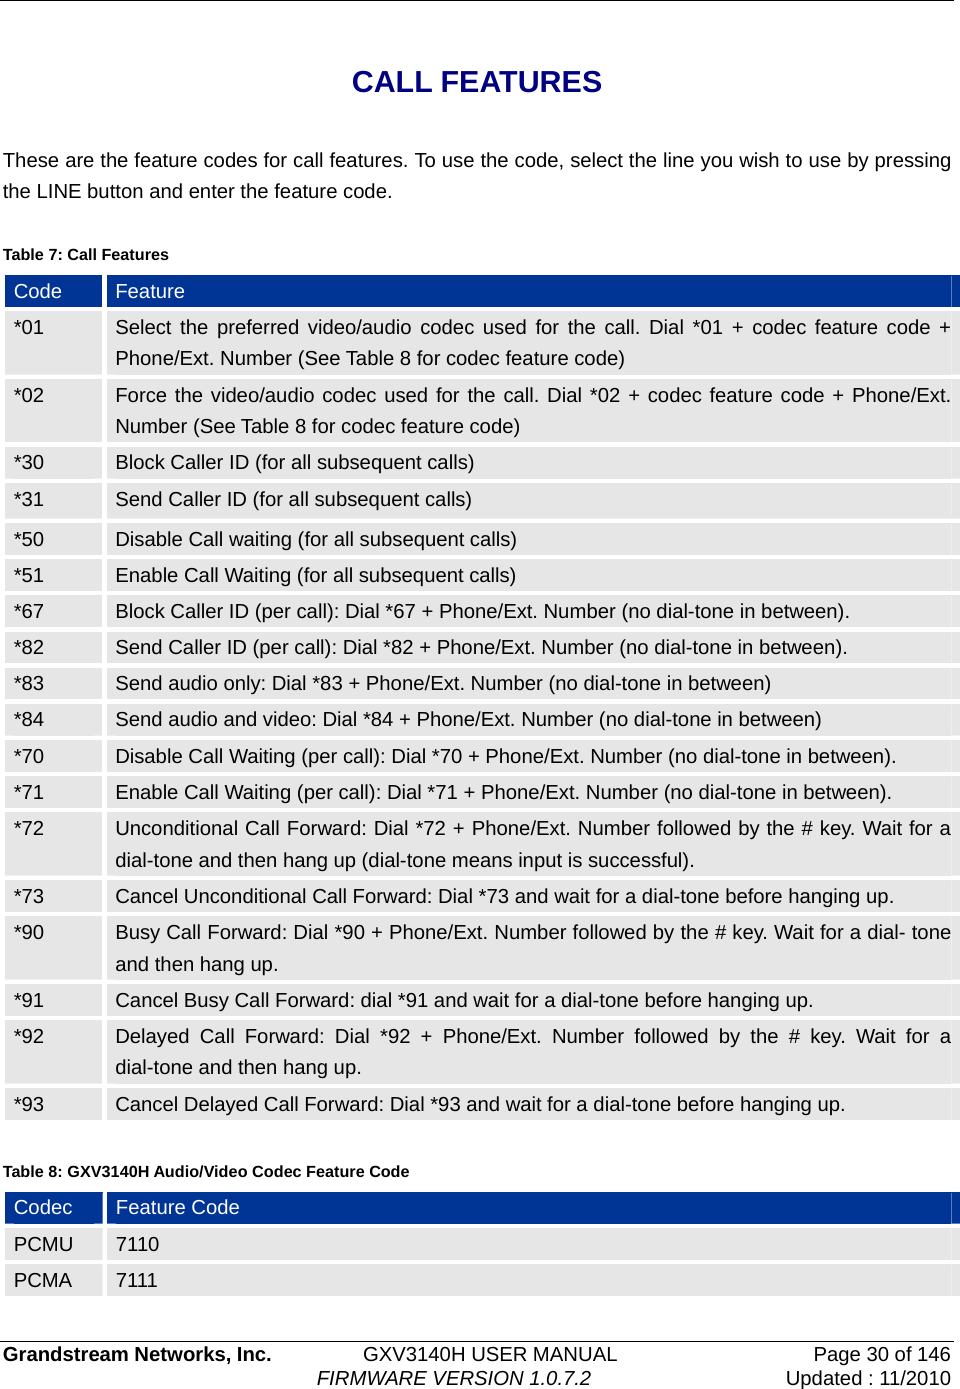   Grandstream Networks, Inc.         GXV3140H USER MANUAL  Page 30 of 146                                FIRMWARE VERSION 1.0.7.2 Updated : 11/2010    CALL FEATURES  These are the feature codes for call features. To use the code, select the line you wish to use by pressing the LINE button and enter the feature code.  Table 7: Call Features Code  Feature *01  Select the preferred video/audio codec used for the call. Dial *01 + codec feature code + Phone/Ext. Number (See Table 8 for codec feature code)   *02  Force the video/audio codec used for the call. Dial *02 + codec feature code + Phone/Ext. Number (See Table 8 for codec feature code) *30  Block Caller ID (for all subsequent calls) *31  Send Caller ID (for all subsequent calls) *50  Disable Call waiting (for all subsequent calls) *51  Enable Call Waiting (for all subsequent calls) *67  Block Caller ID (per call): Dial *67 + Phone/Ext. Number (no dial-tone in between). *82  Send Caller ID (per call): Dial *82 + Phone/Ext. Number (no dial-tone in between). *83  Send audio only: Dial *83 + Phone/Ext. Number (no dial-tone in between) *84  Send audio and video: Dial *84 + Phone/Ext. Number (no dial-tone in between)   *70  Disable Call Waiting (per call): Dial *70 + Phone/Ext. Number (no dial-tone in between). *71  Enable Call Waiting (per call): Dial *71 + Phone/Ext. Number (no dial-tone in between). *72  Unconditional Call Forward: Dial *72 + Phone/Ext. Number followed by the # key. Wait for a dial-tone and then hang up (dial-tone means input is successful). *73  Cancel Unconditional Call Forward: Dial *73 and wait for a dial-tone before hanging up. *90  Busy Call Forward: Dial *90 + Phone/Ext. Number followed by the # key. Wait for a dial- tone and then hang up. *91  Cancel Busy Call Forward: dial *91 and wait for a dial-tone before hanging up. *92  Delayed Call Forward: Dial *92 + Phone/Ext. Number followed by the # key. Wait for a dial-tone and then hang up. *93  Cancel Delayed Call Forward: Dial *93 and wait for a dial-tone before hanging up.  Table 8: GXV3140H Audio/Video Codec Feature Code Codec  Feature Code   PCMU  7110 PCMA  7111  